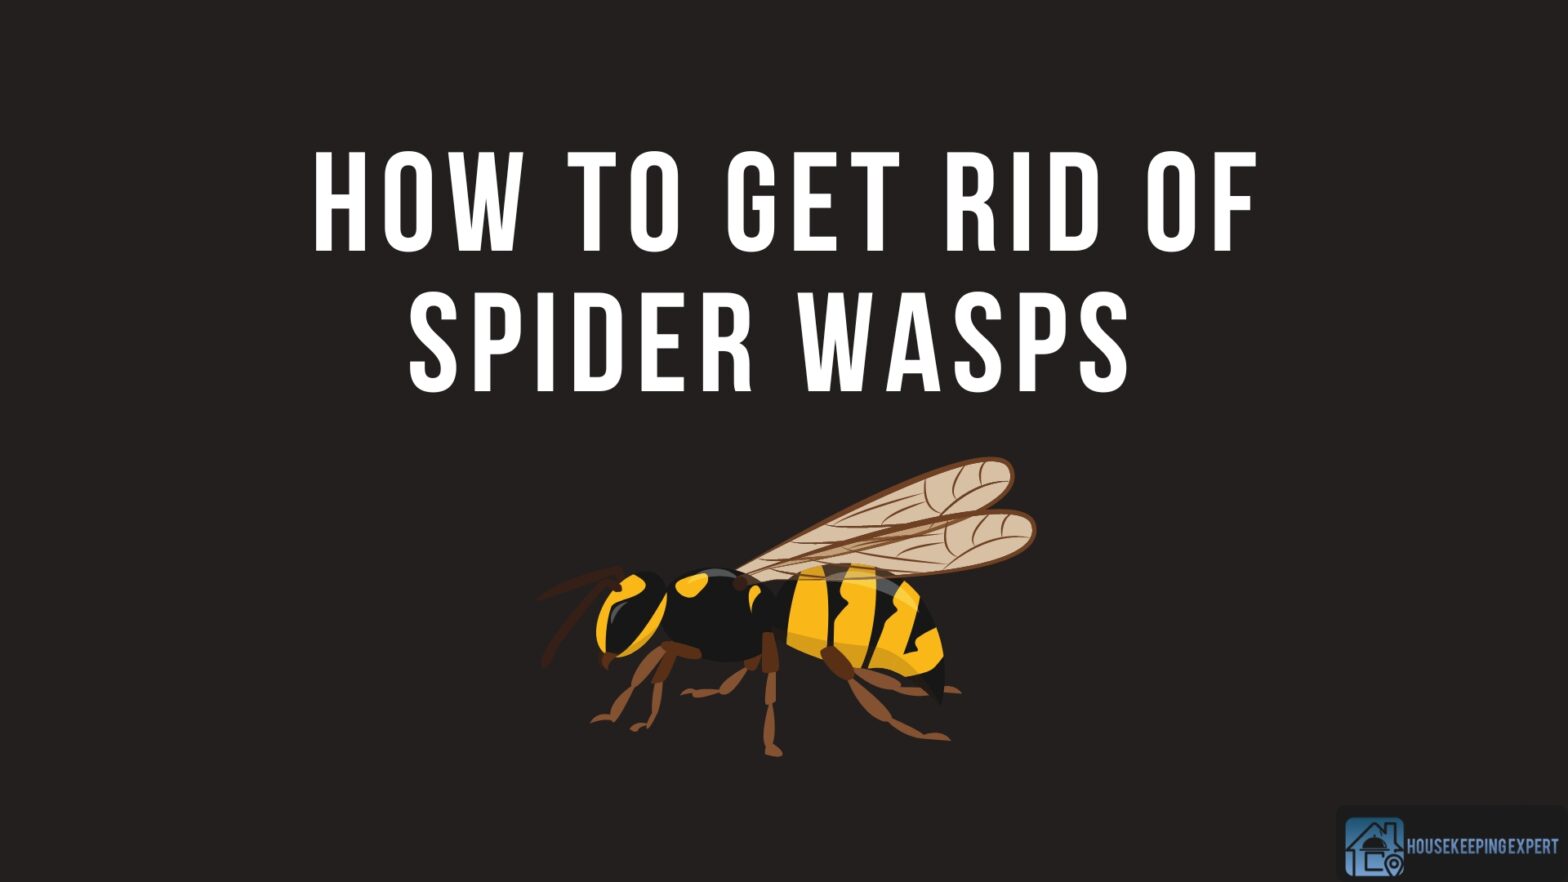 How To Get Rid Of Spider Wasps